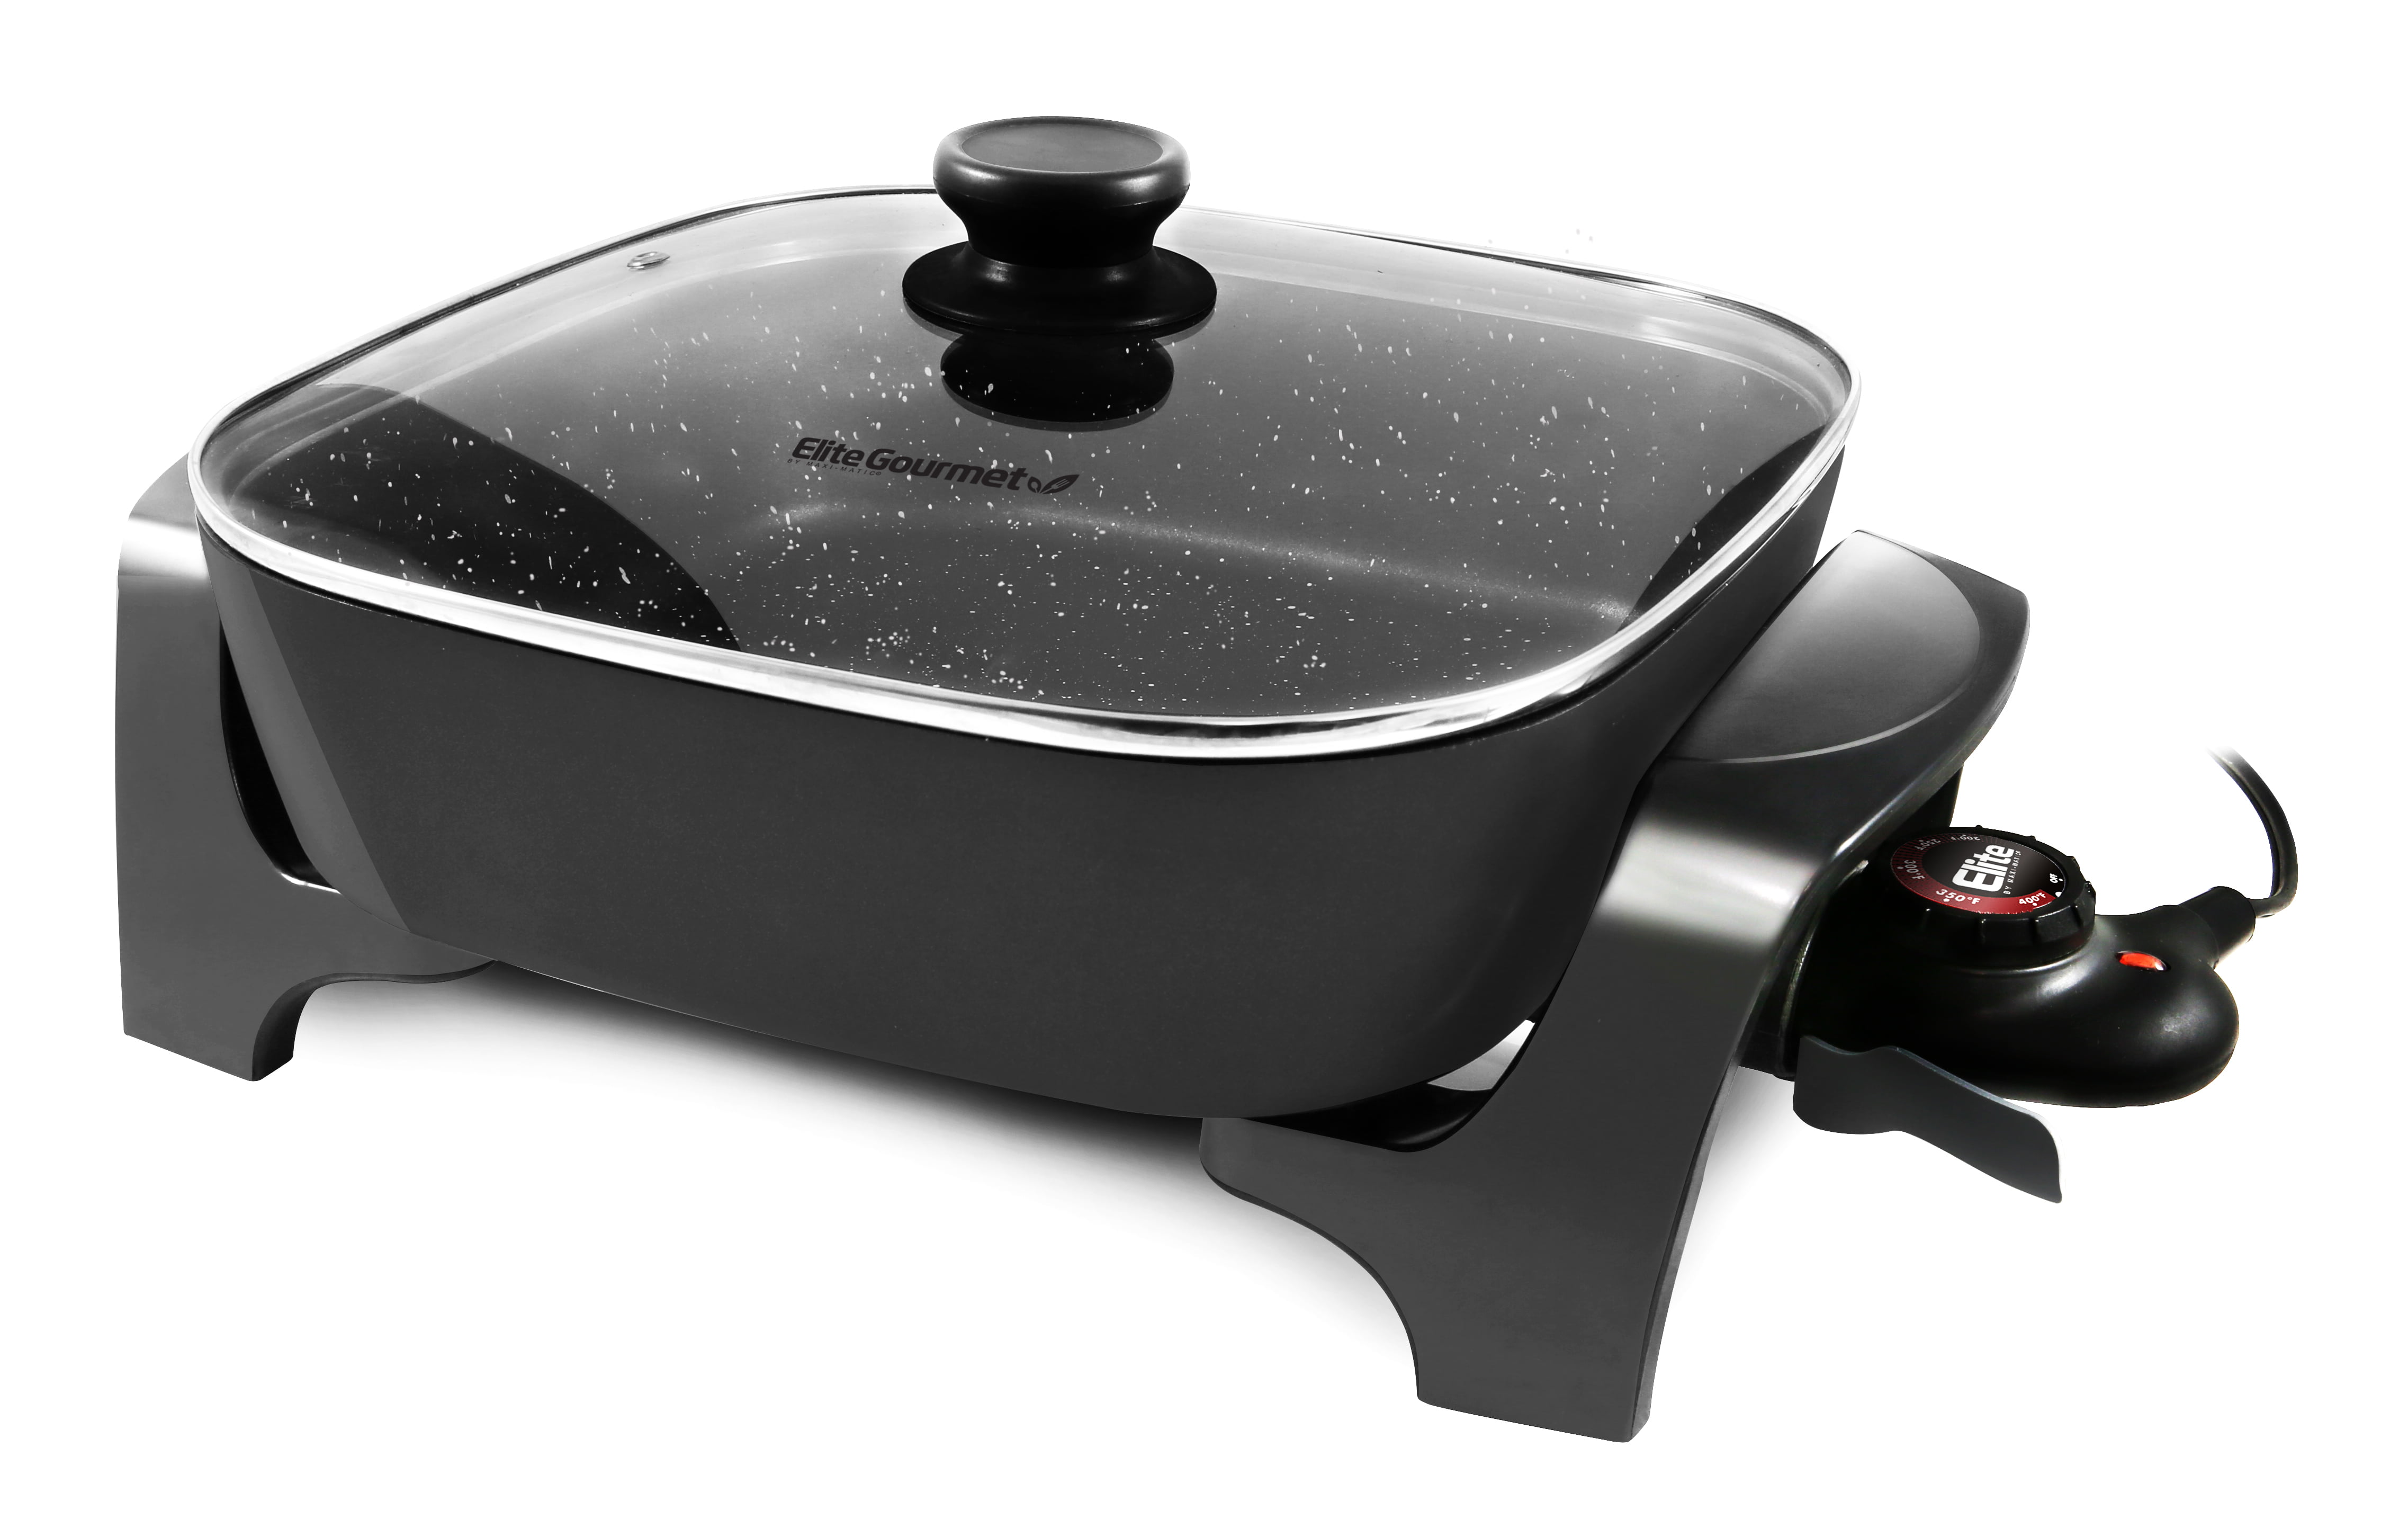 16 in Electric Skillet Foldaway Non-Stick Grill Roast Frying Pan with Glass Lid